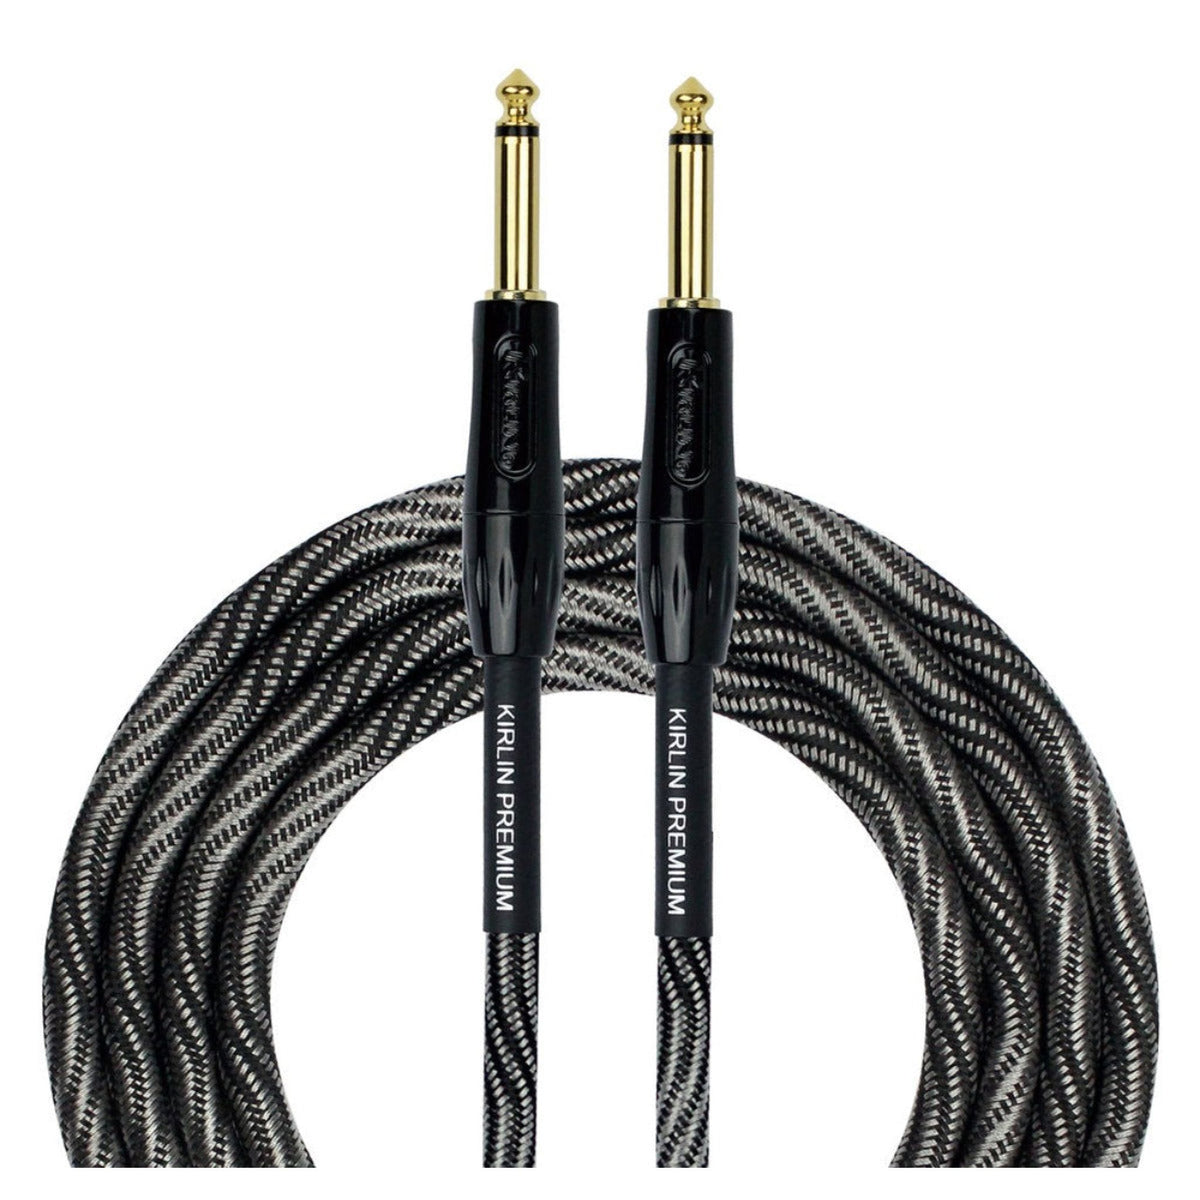 Our Premium Plus 20-gauge woven jacket noise-free instrument cable is professionally designed to prevent external interference and ensure signals travel rapidly and smoothly with minimum distortion, delay, or loss. 